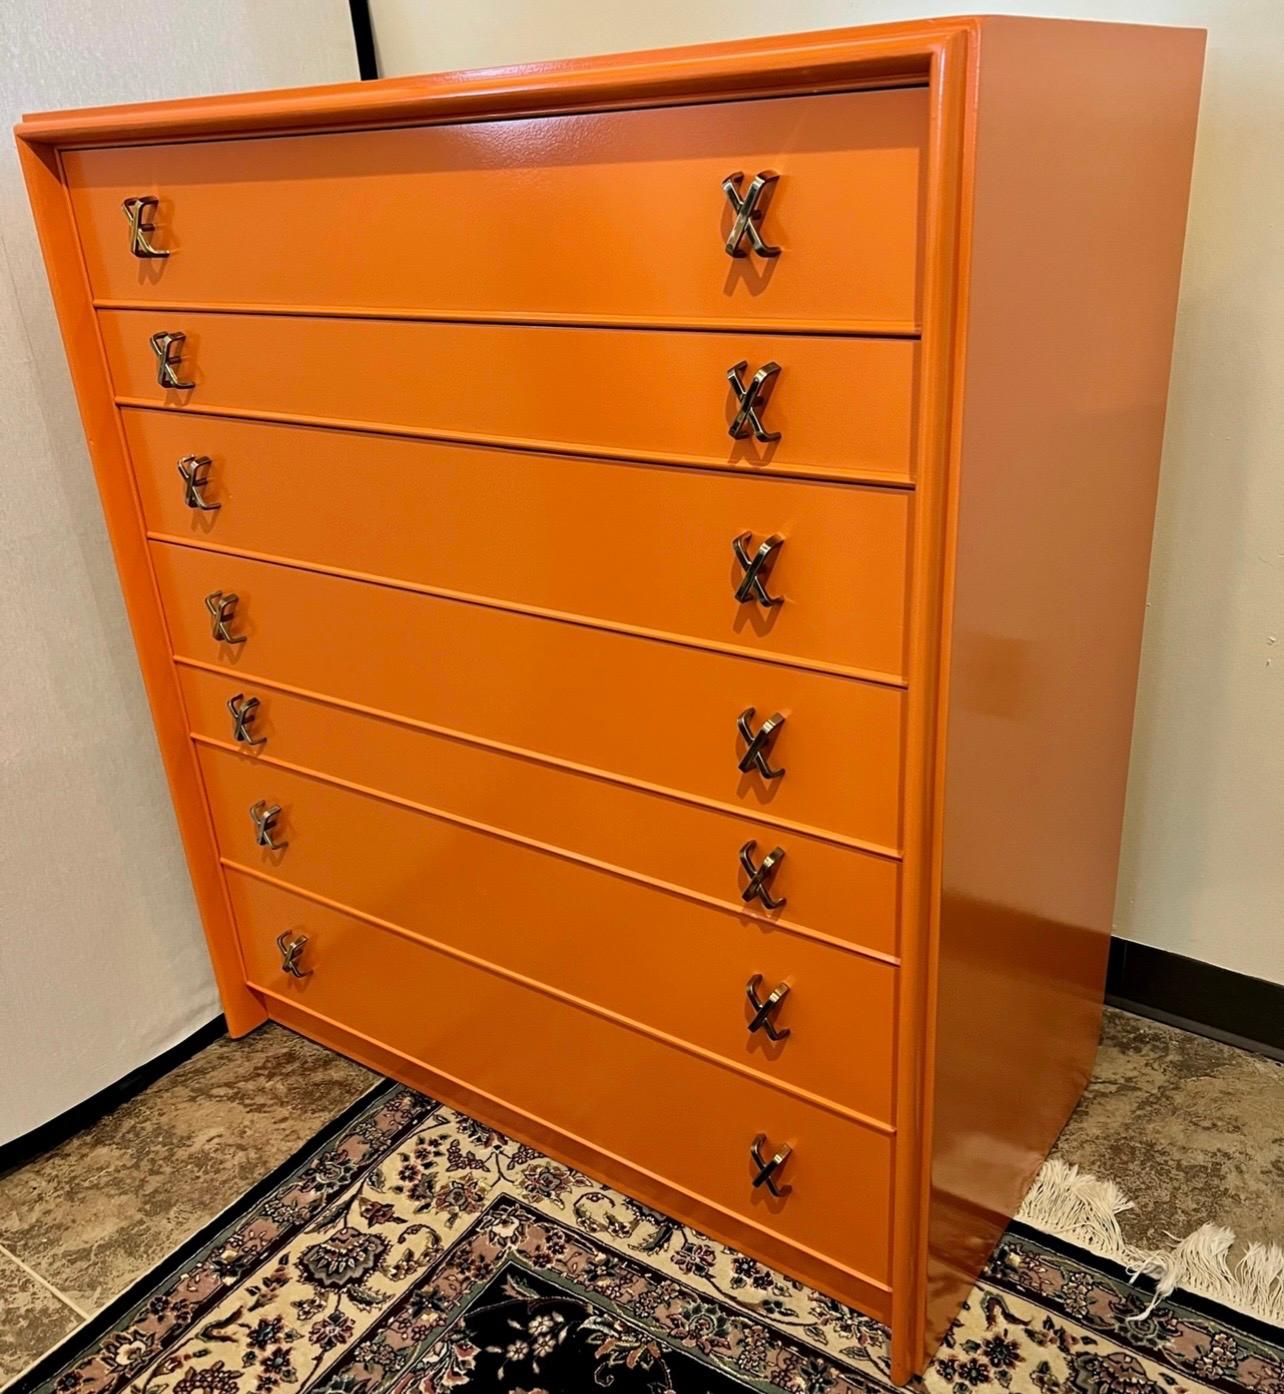 This newly lacquered sophisticated high chest was designed by Paul Frankl for the Johnson Furniture Company, circa late 1940s-early 1950s. The coveted Johnson hallmark is incised inside. It is a prime example of Frankl's mid-century work, which was